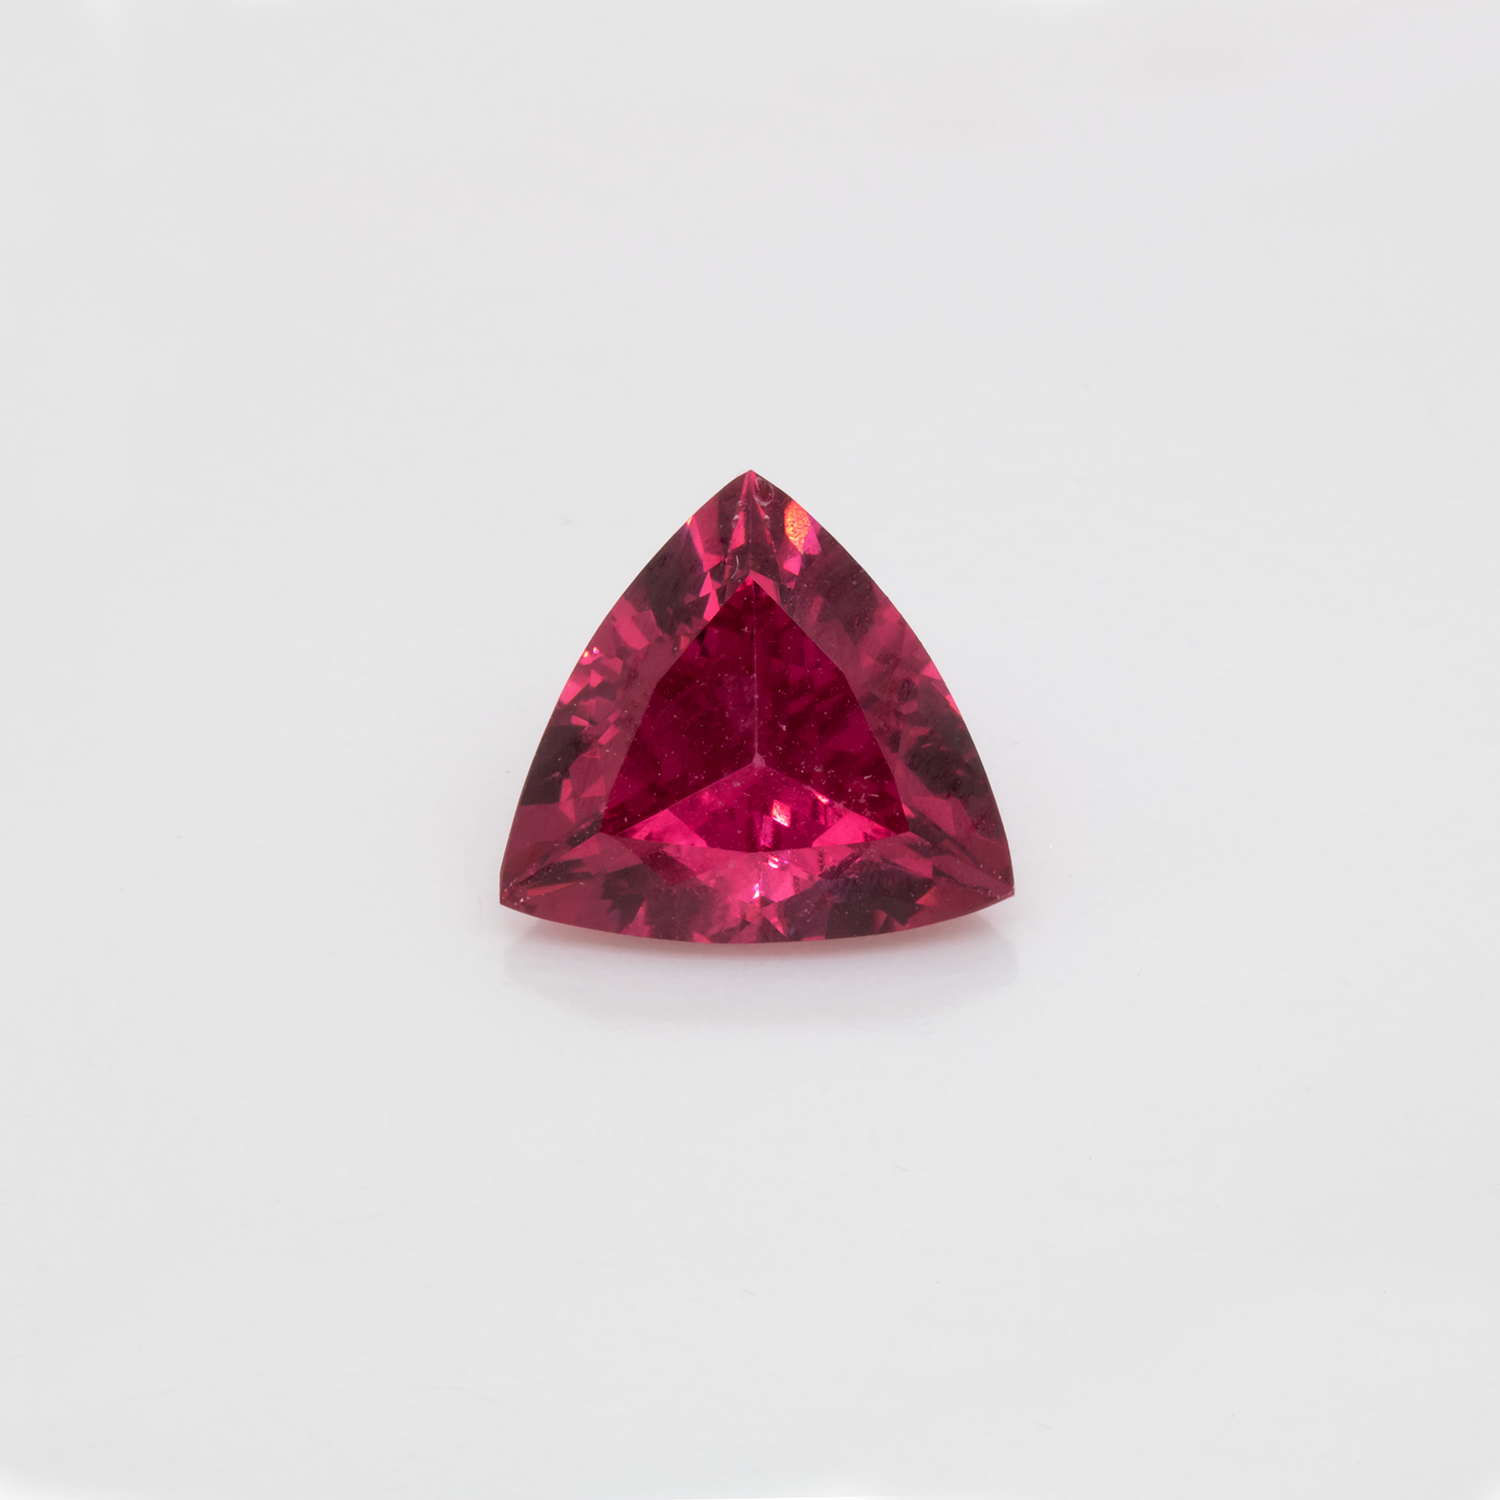 Spinell - rot, trillion, 8.5x8.5 mm, 1.94 cts, Nr. SP90027